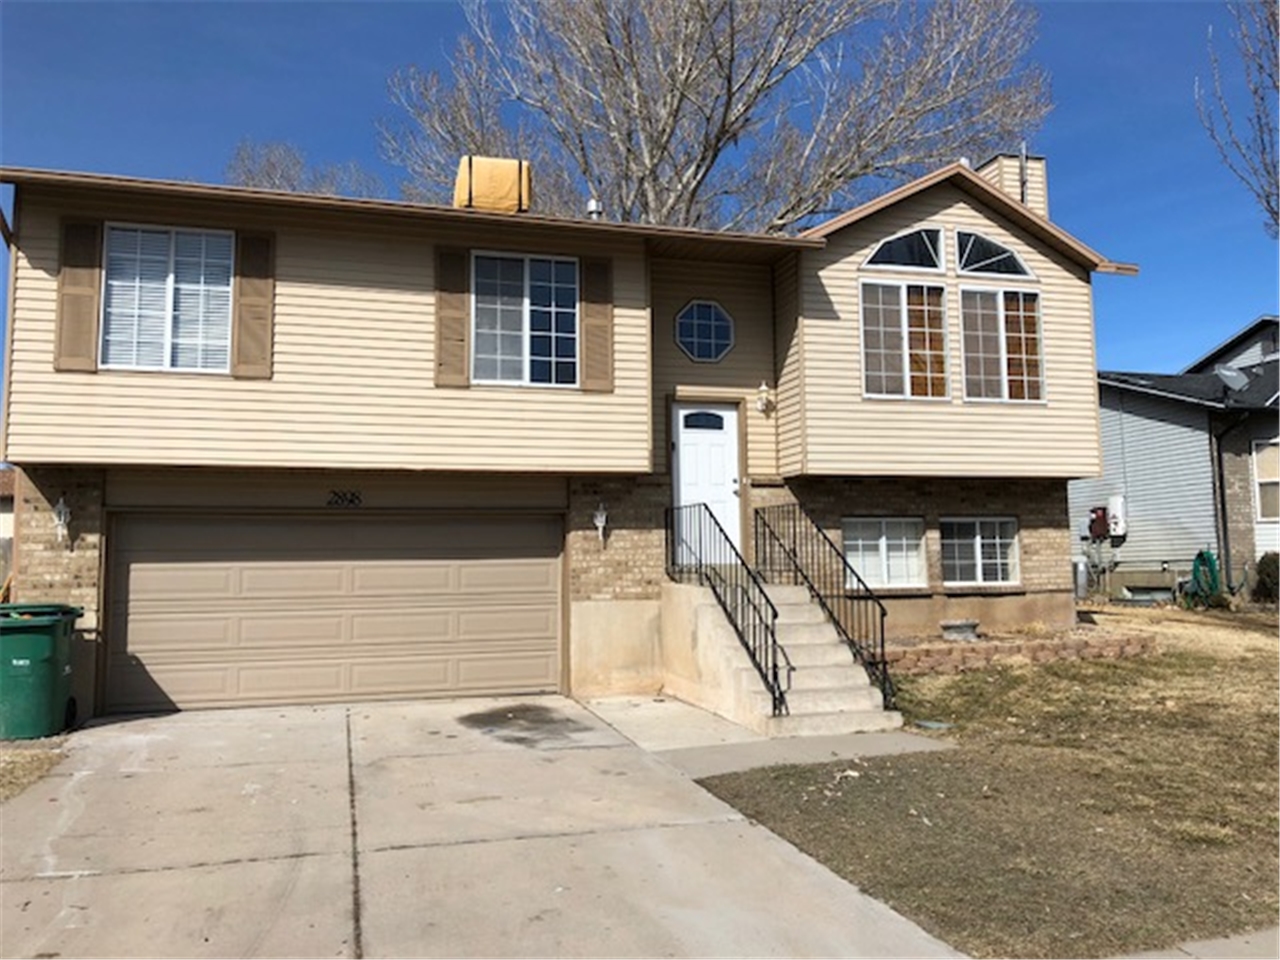 House For Rent At 2898 W 5925 S Roy Ut 84067 Rentler